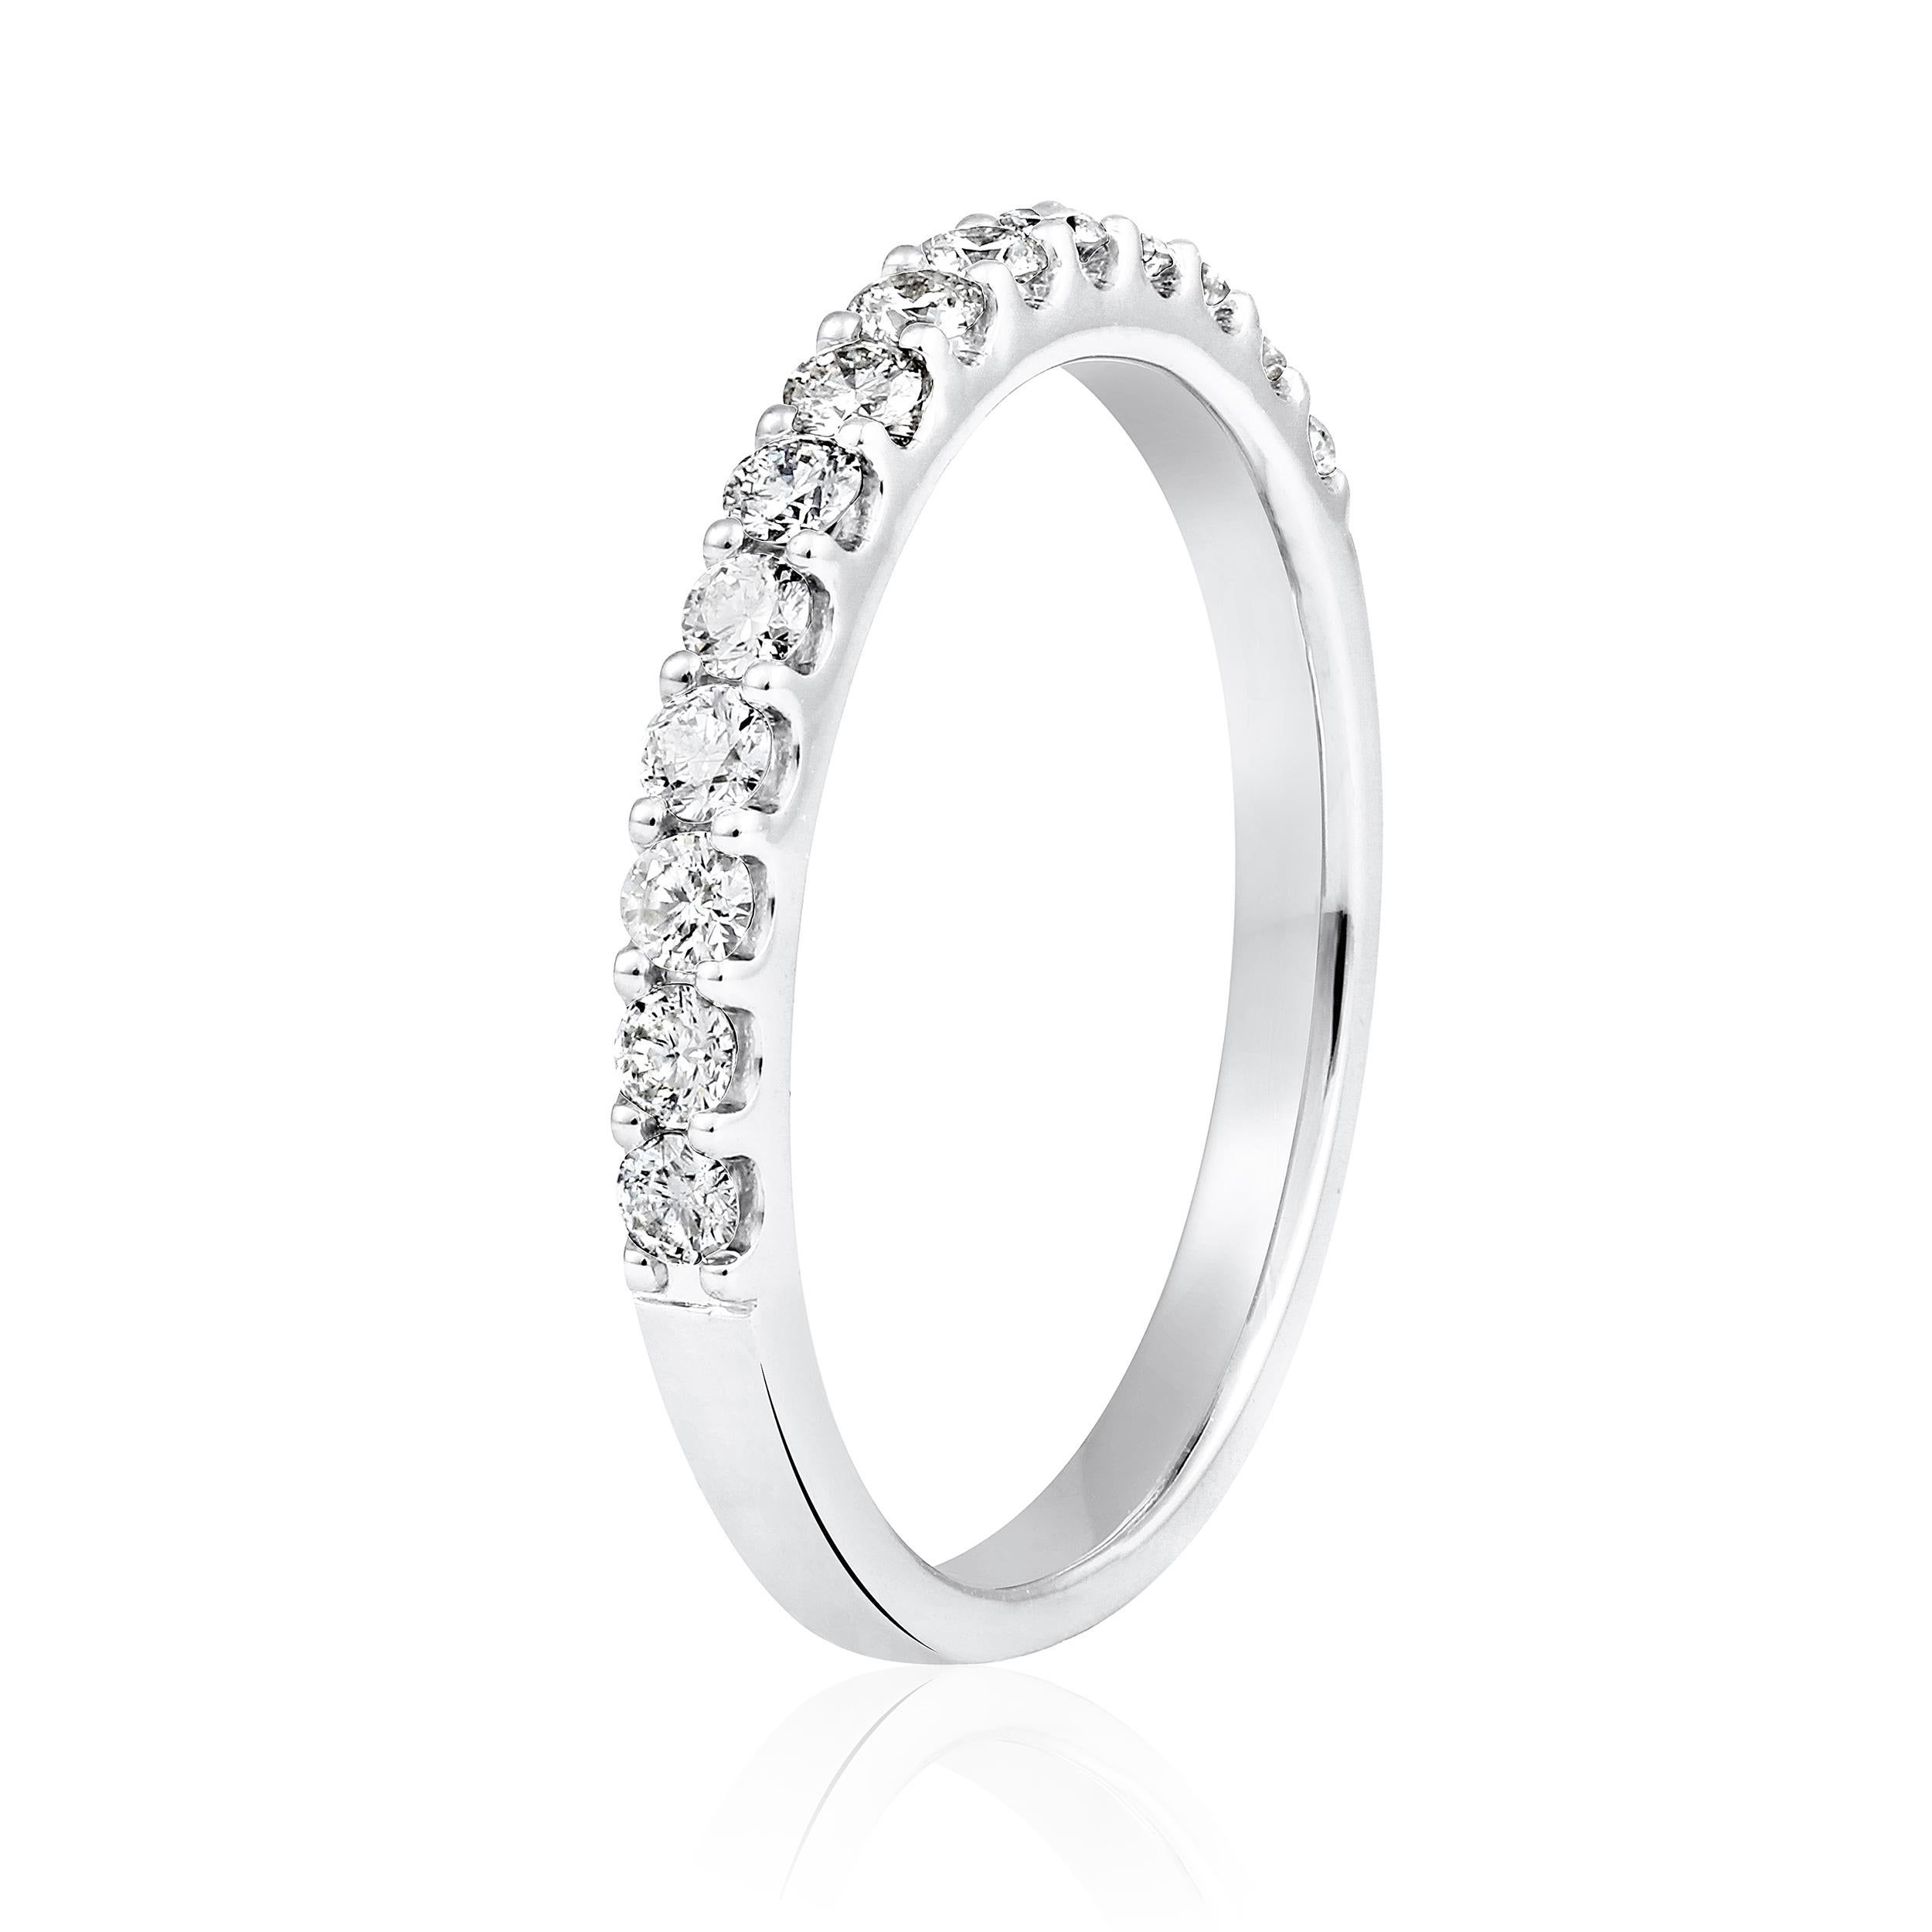 Ring Size: US 8 

Crafted in 2.55 grams of 14K White Gold, the ring contains 14 stones of Round Diamonds with a total of 0.48 carat in G-H color and SI clarity.

CONTEMPORARY AND TIMELESS ESSENCE: Crafted in 14-karat/18-karat with 100% natural